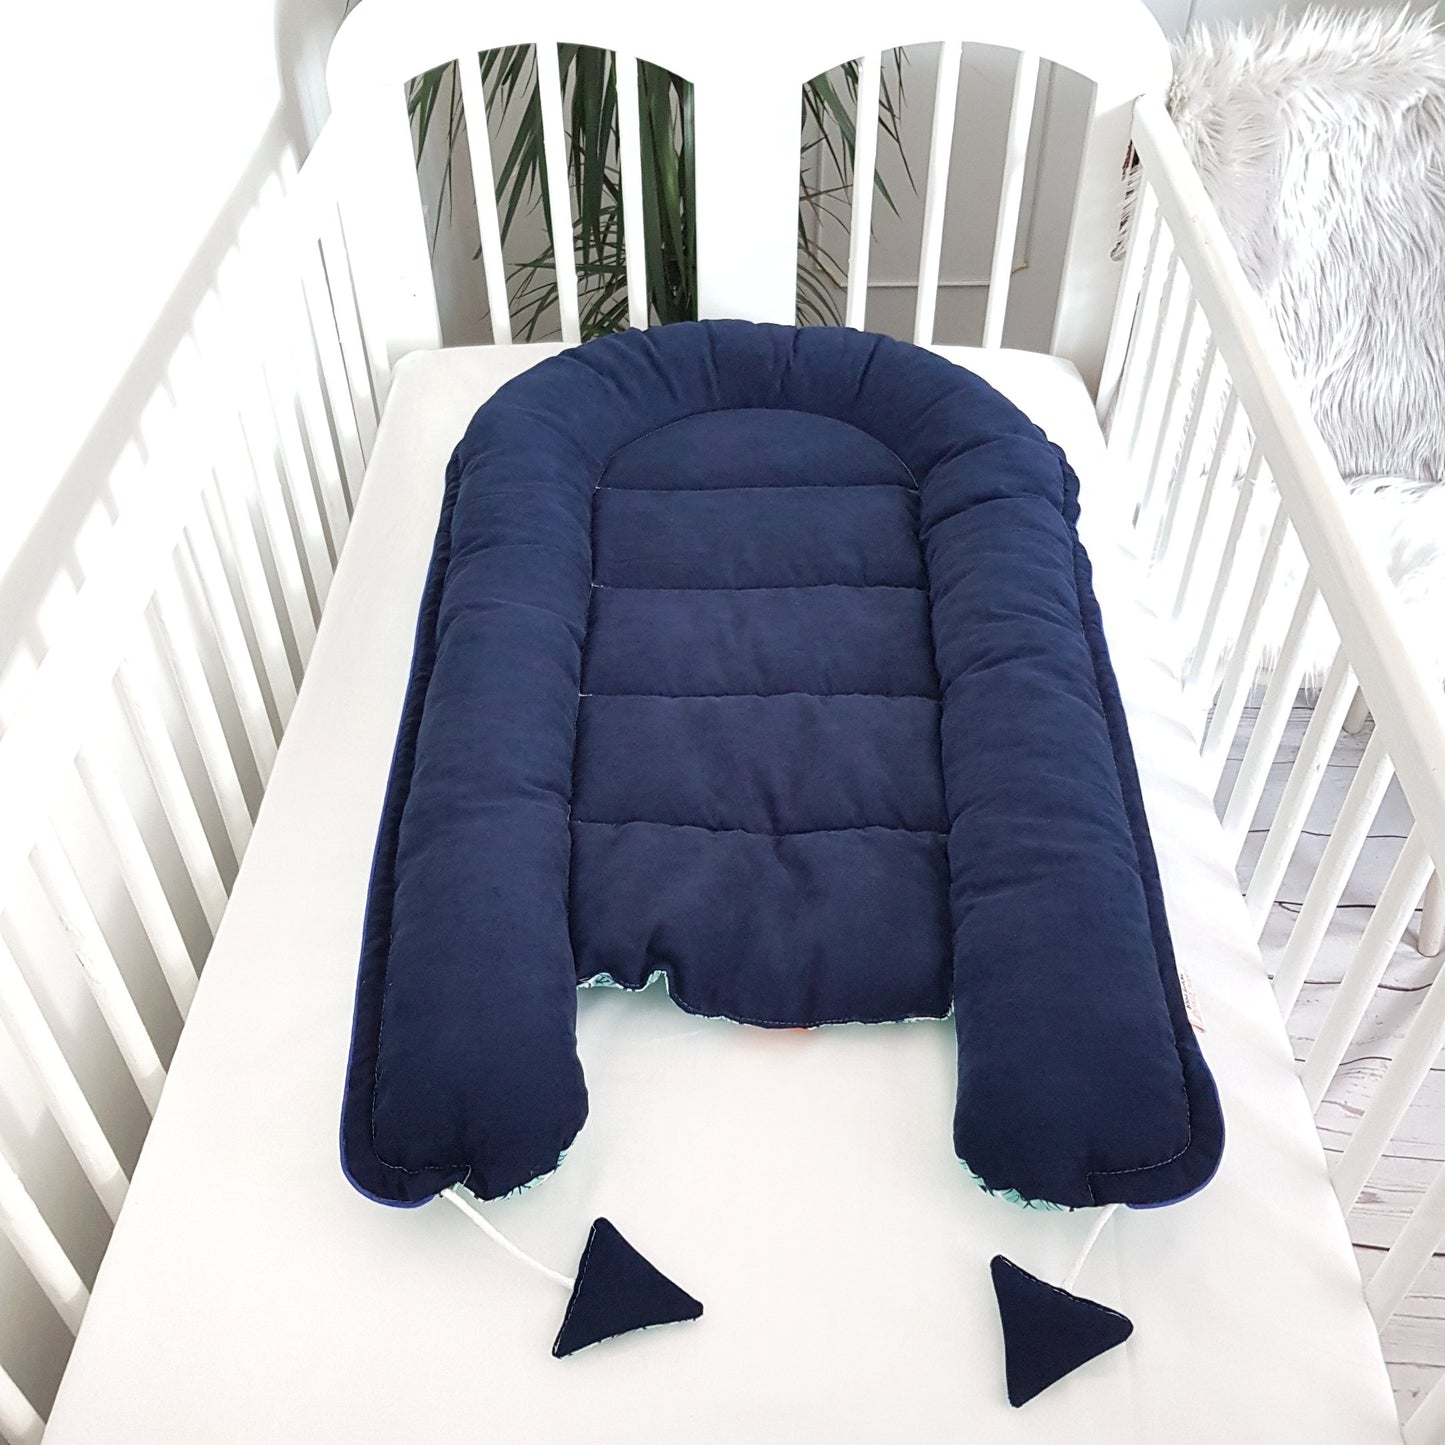 BABY SLEEPING POD NEST DELUXE - 5 PIECE SET FOREST. Back order